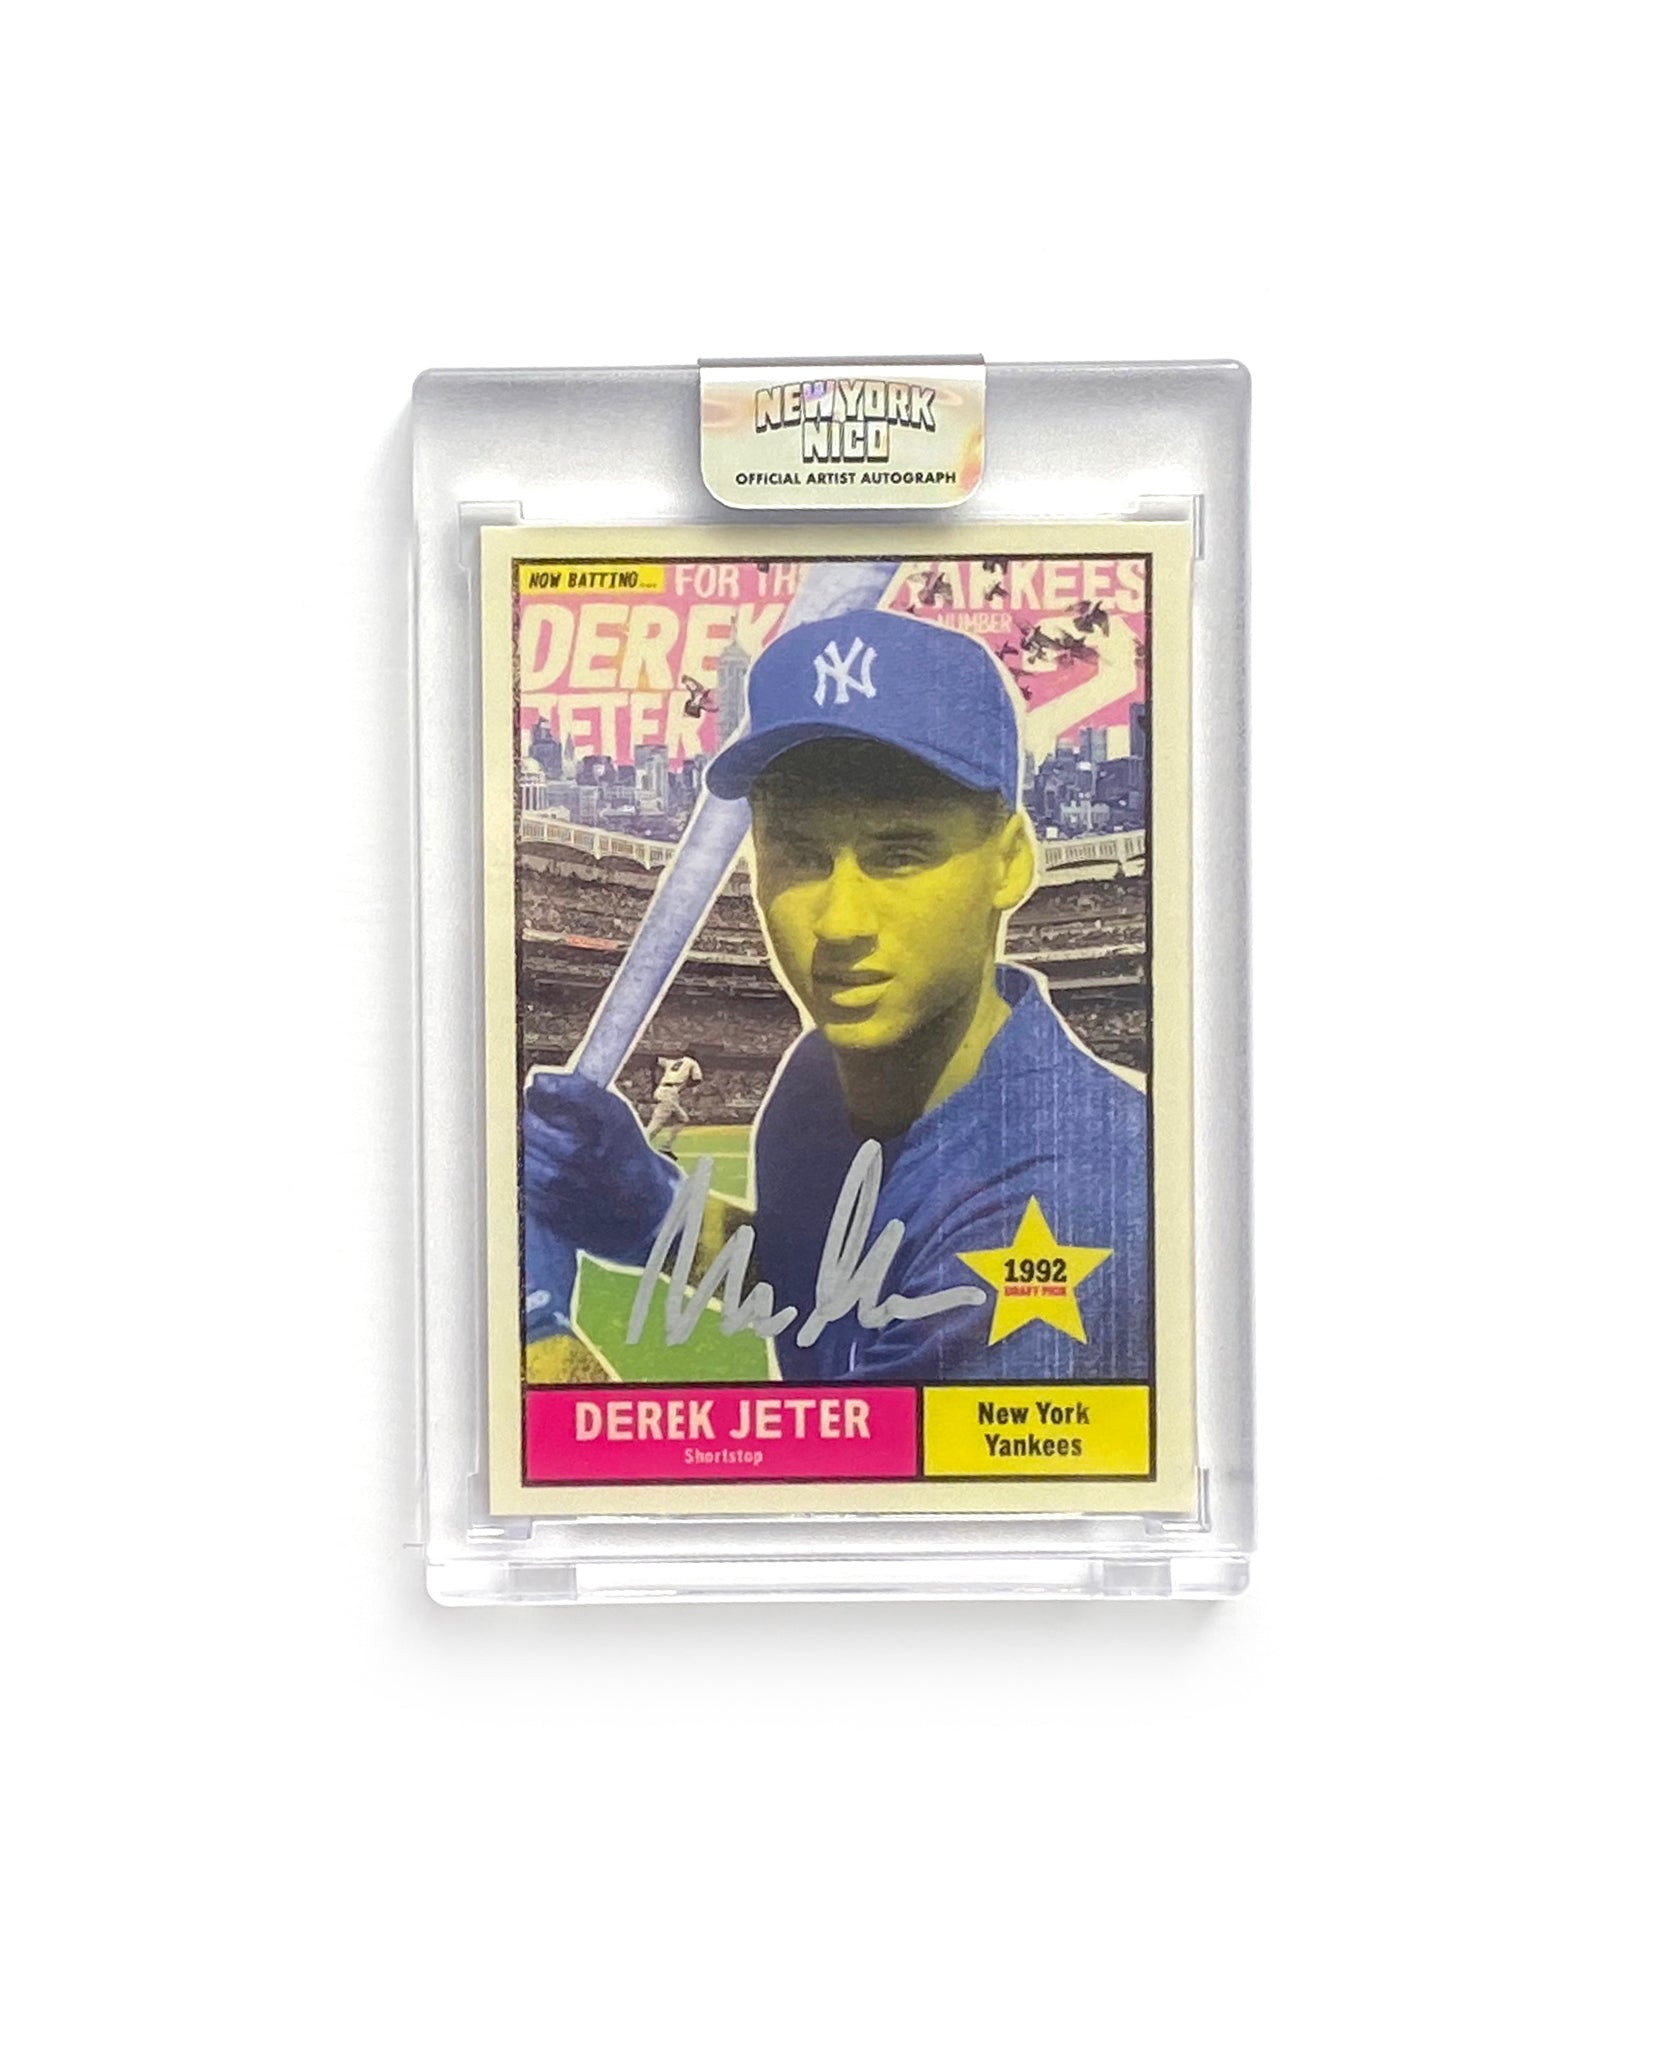 Derek Jeter Rookie Yankees Autograph On Card with Certificate of